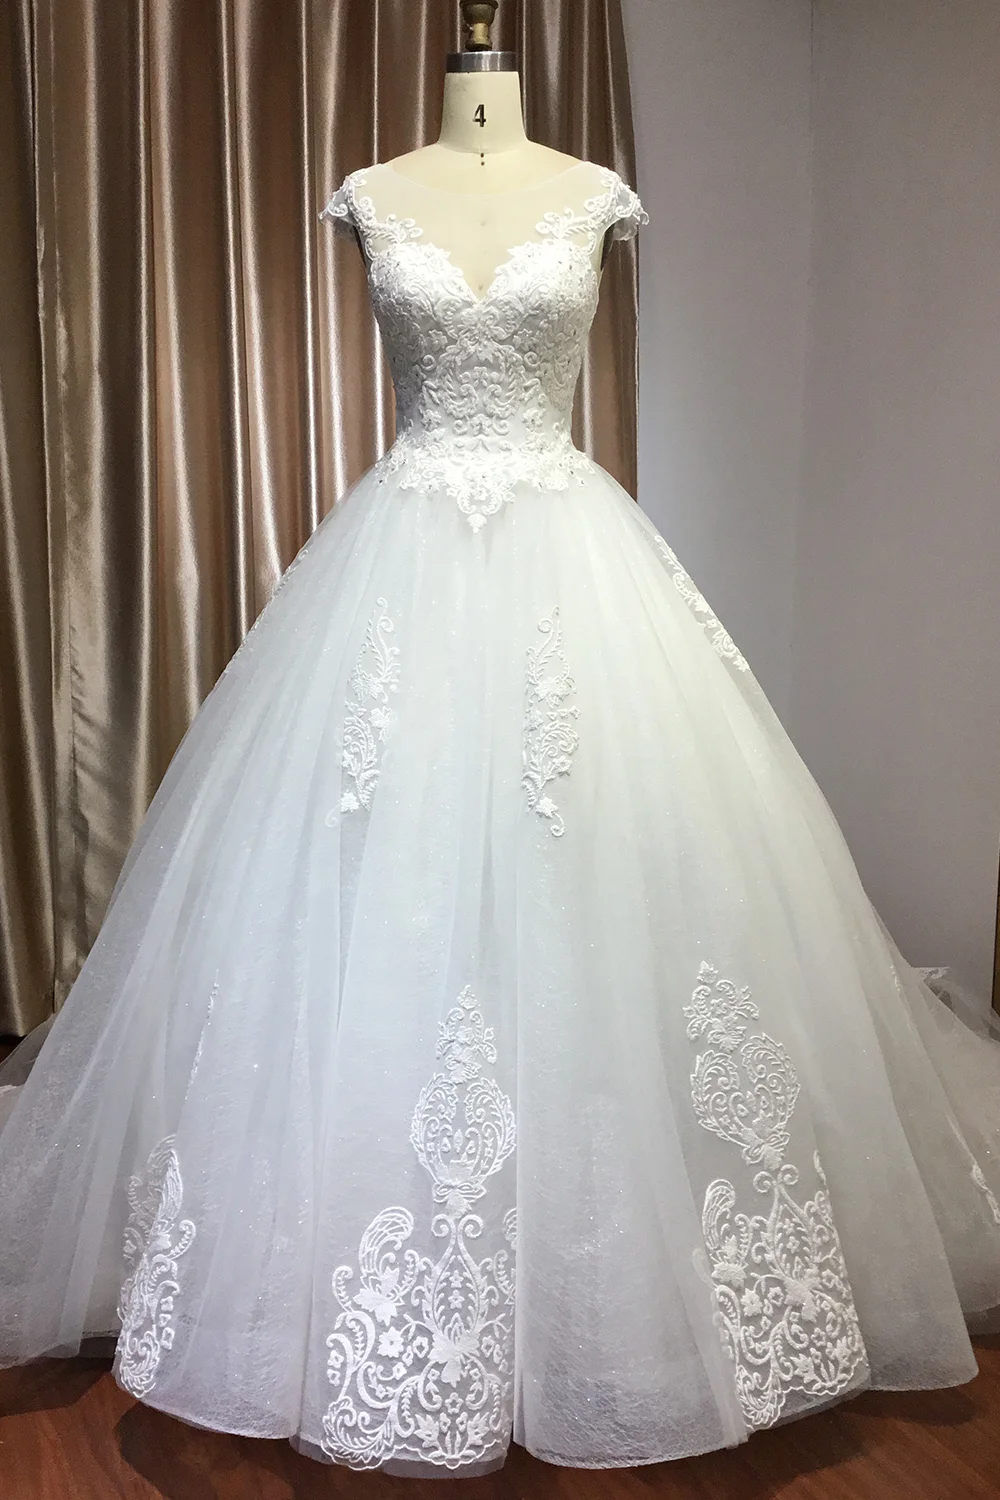 Daisda Elegant Cap Sleeve Sheer Tulle Ball Gown Wedding Dress With Lace V-neck